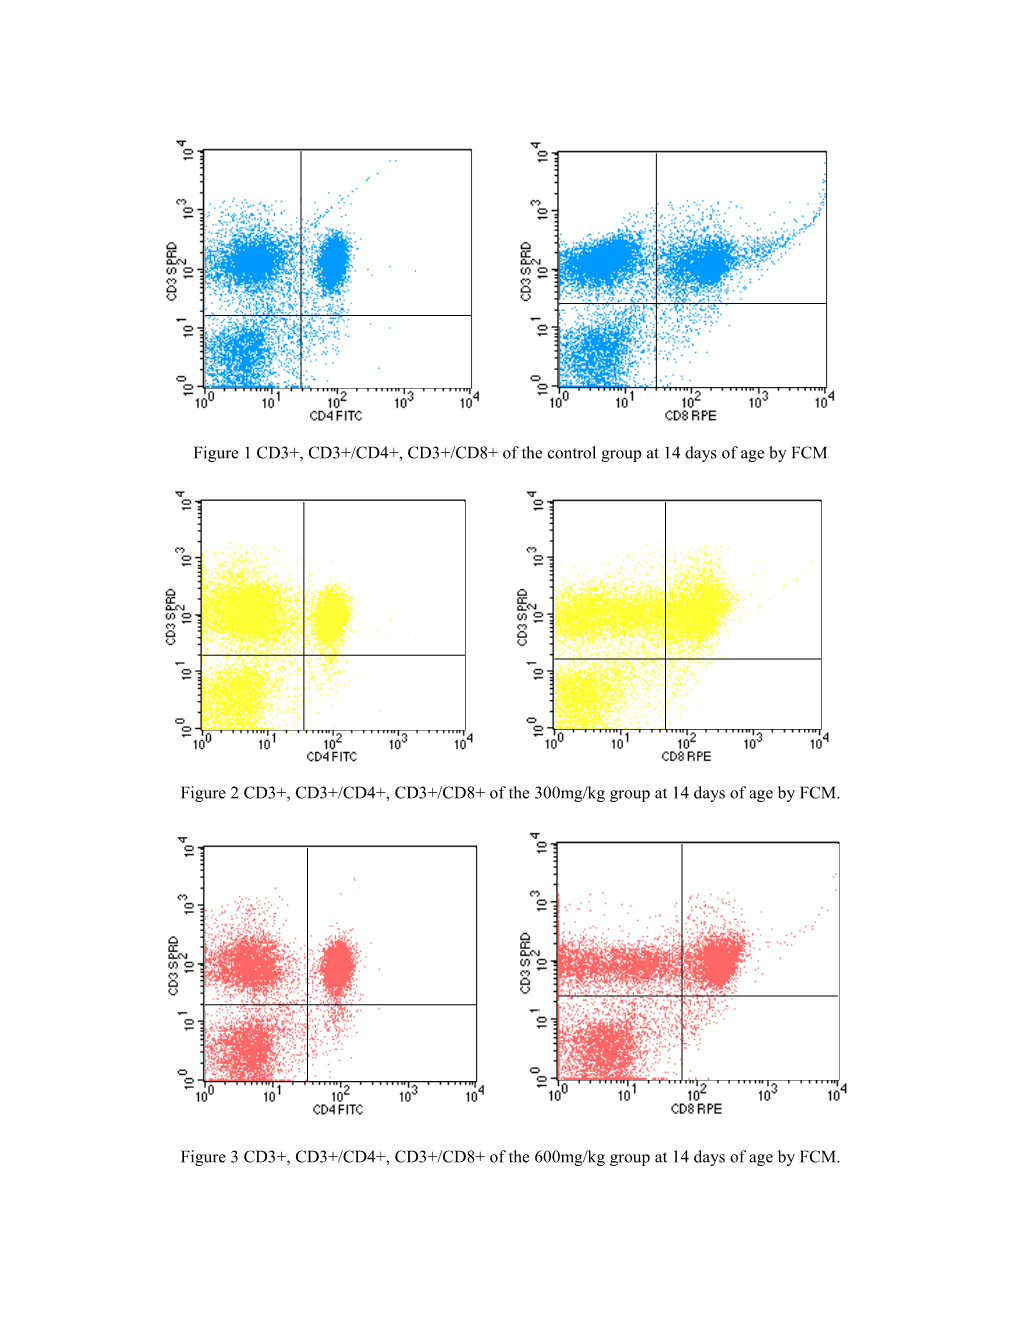 Figure 1 CD3+, CD3+/CD4+, CD3+/CD8+ of the Control Group at 14 Days of Age by FCM